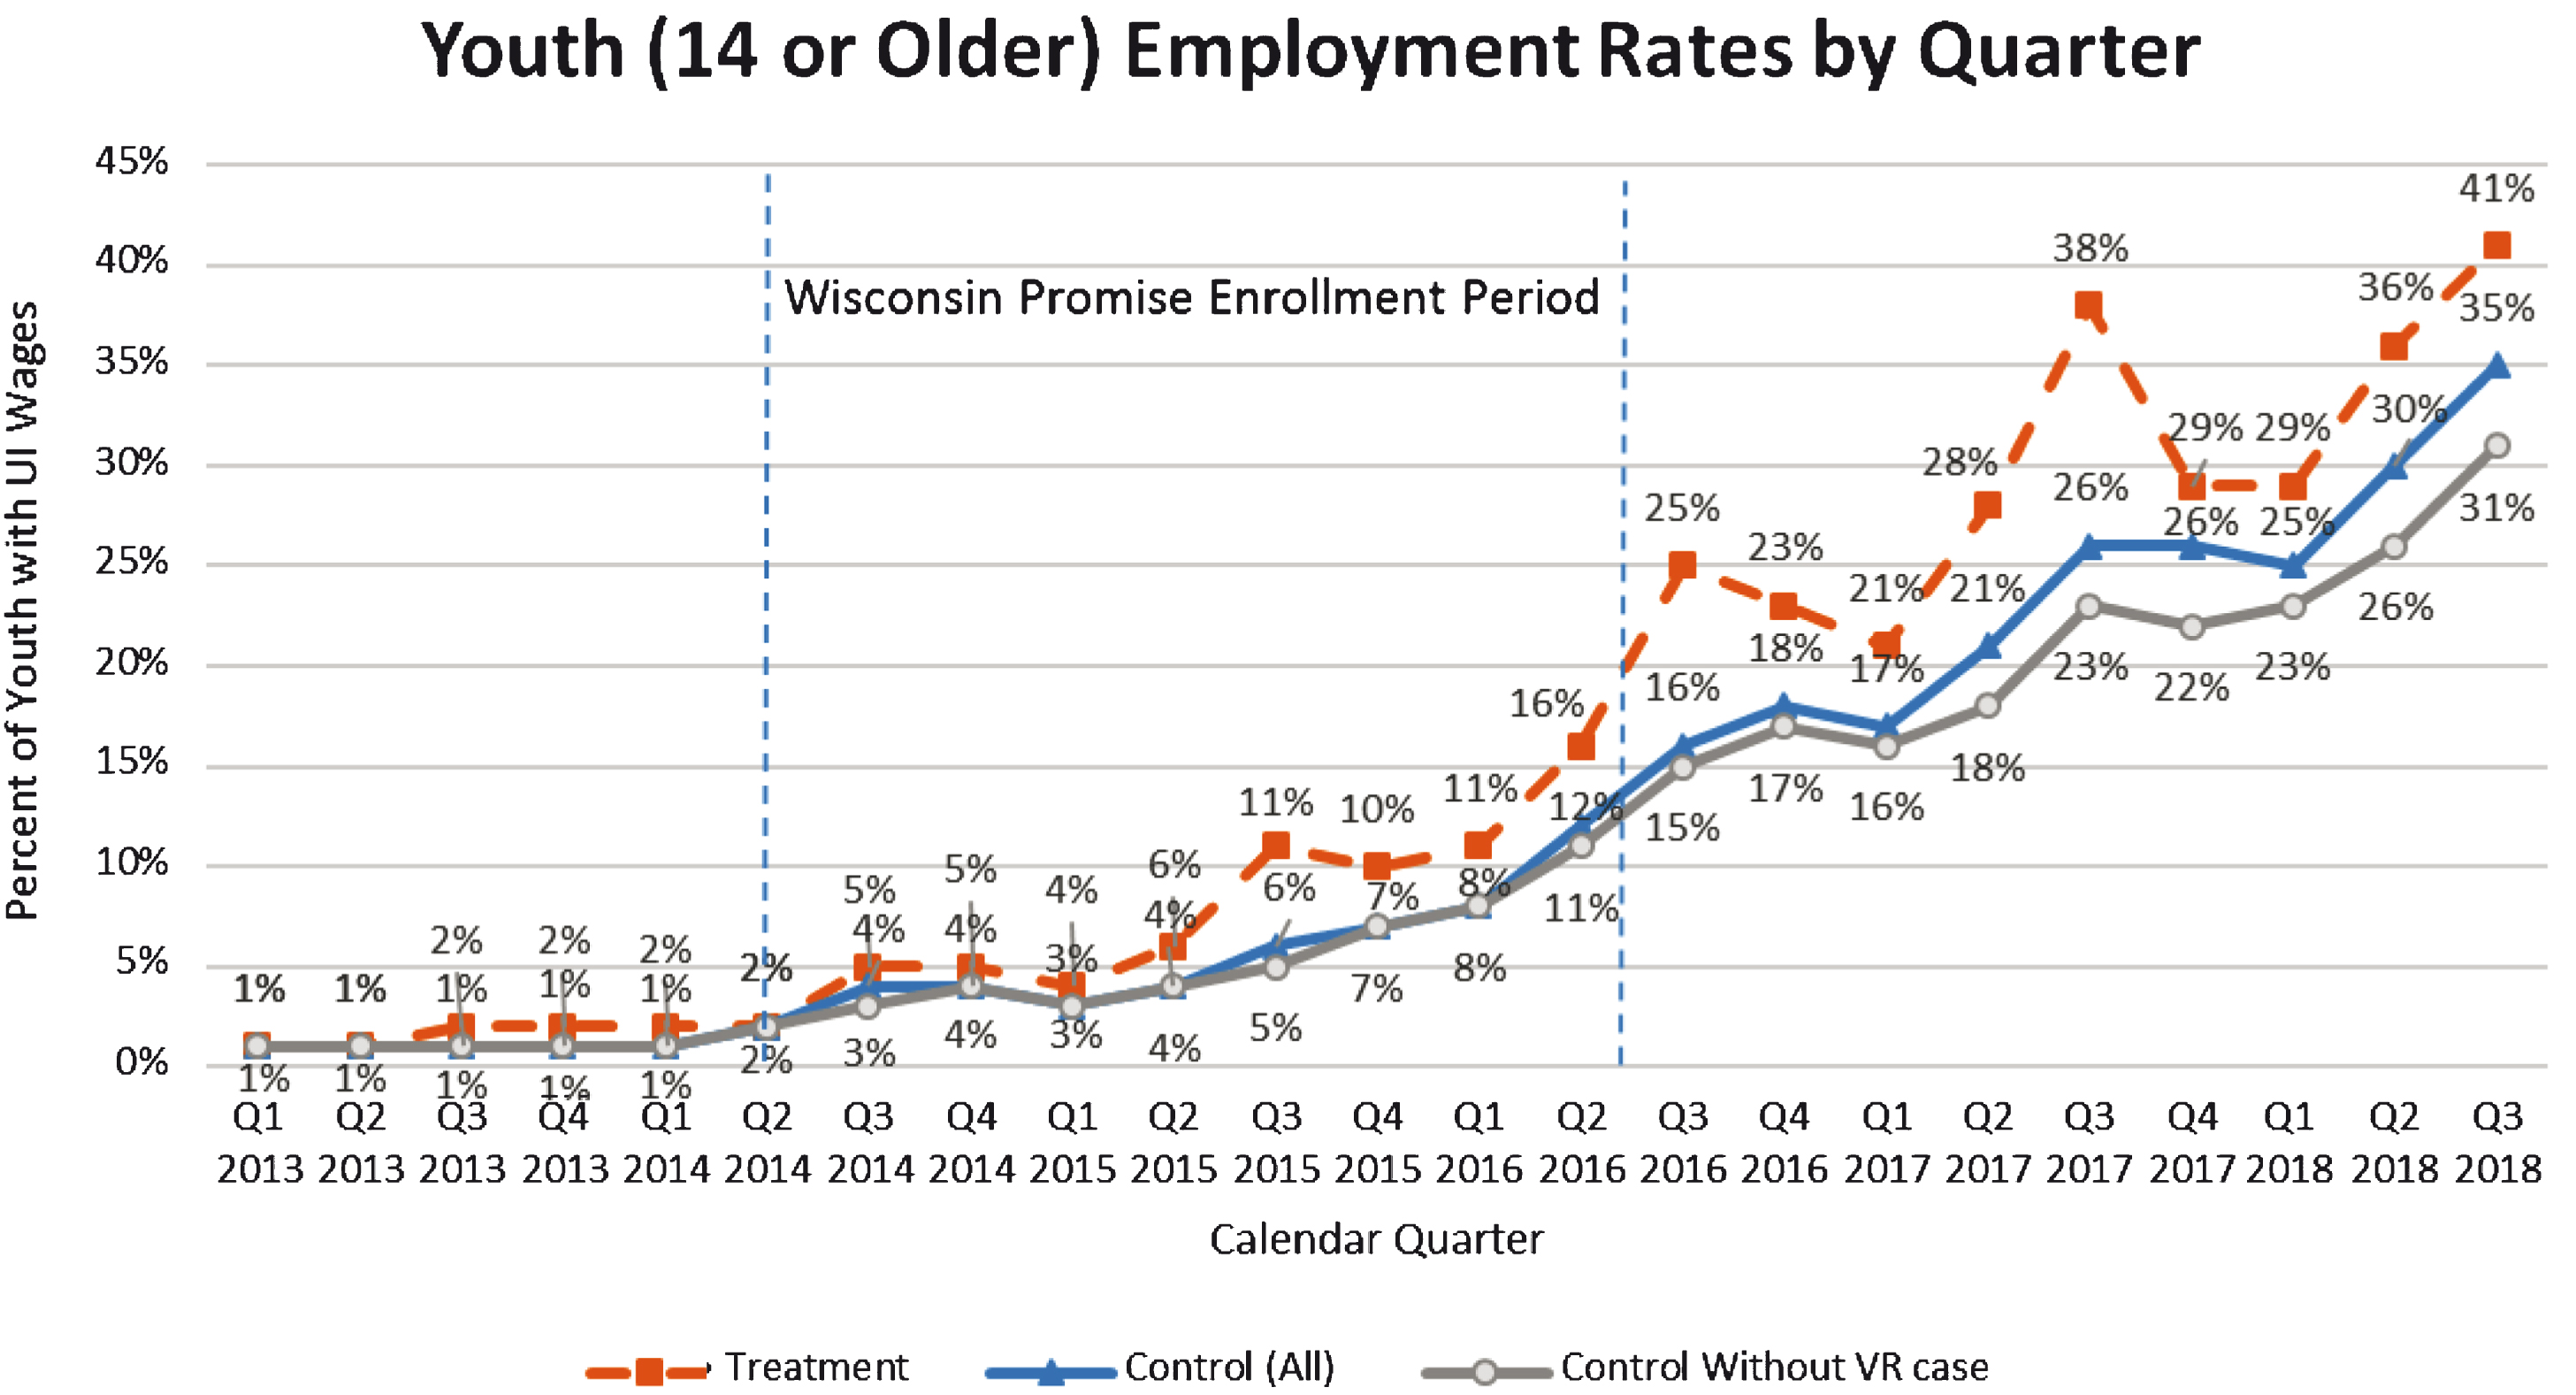 Percent Youth with UI Wages by Quarter and Treatment Group Figure Caption: Percent of youth who were 14 or older with wages reported to Wisconsin UI in calendar quarters from quarter one of 2013 to quarter three of 2018. Percent of treatment youth with reported wages is represented by the dashed line with closed squares, control group is represented by the solid line with closed triangles, and the subset of the control group without a VR case is represented by the solid line with open circles.